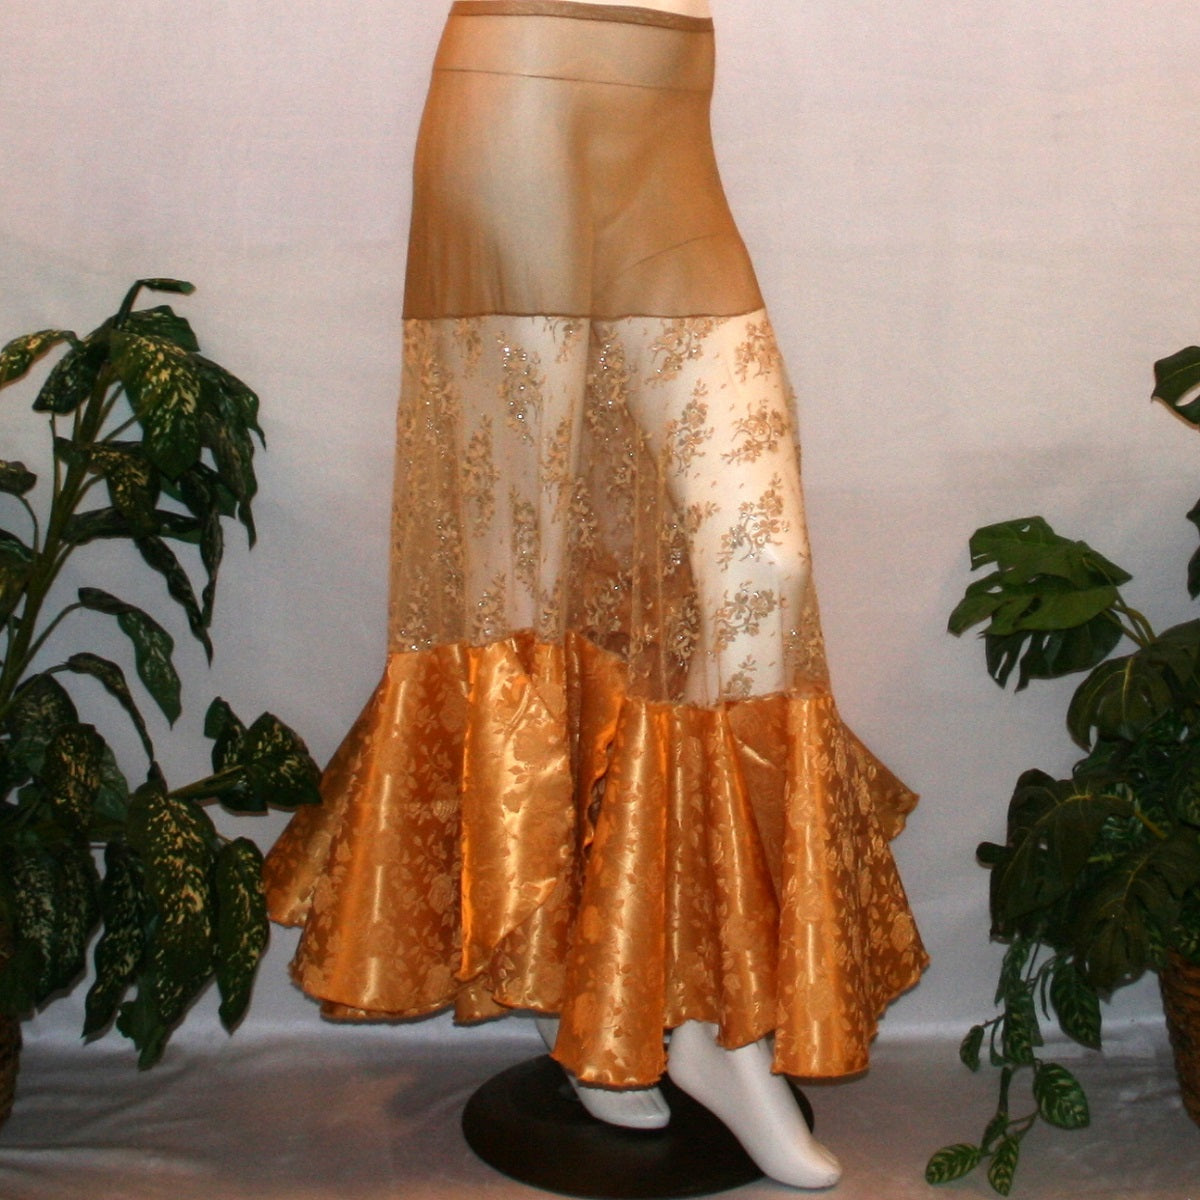 Ballroom skirt created on a nude illusion hip base of a gorgeous & delicate gold lace top flared section with gold brocade flounces at the bottom. 